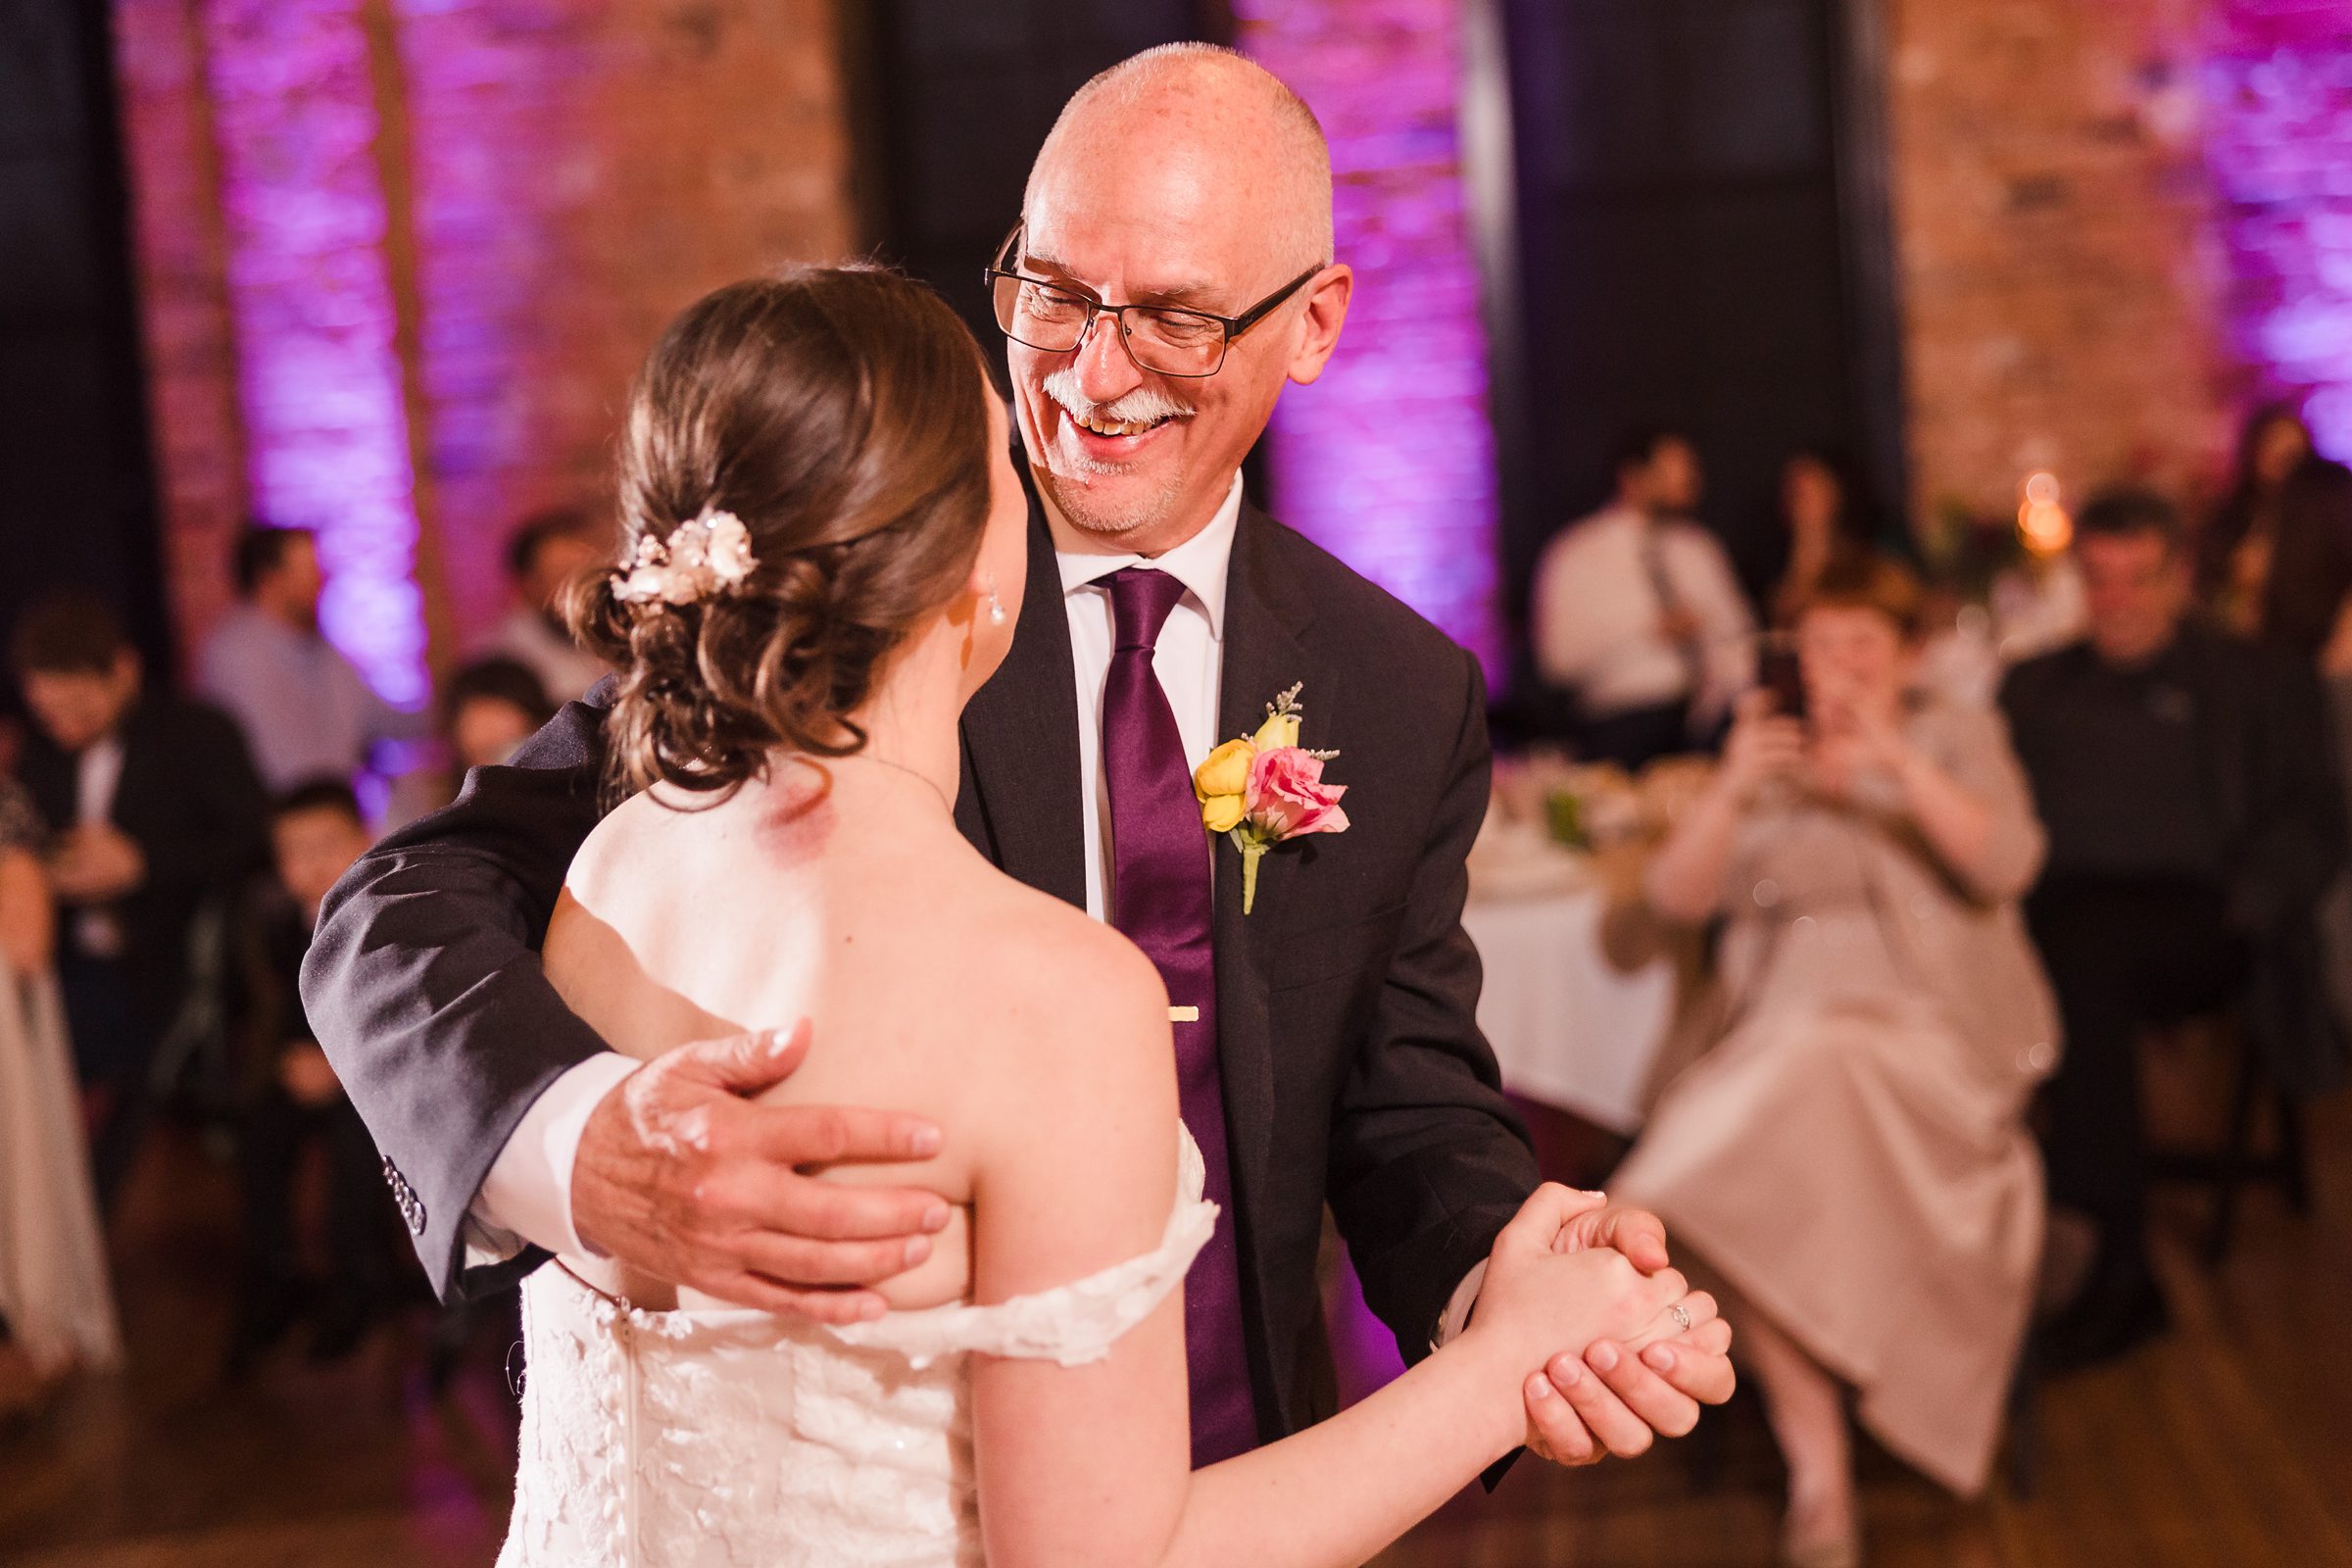 Bride dances with her father during her wedding at the Trailside Event Center in Peoria Heights, Illinois.